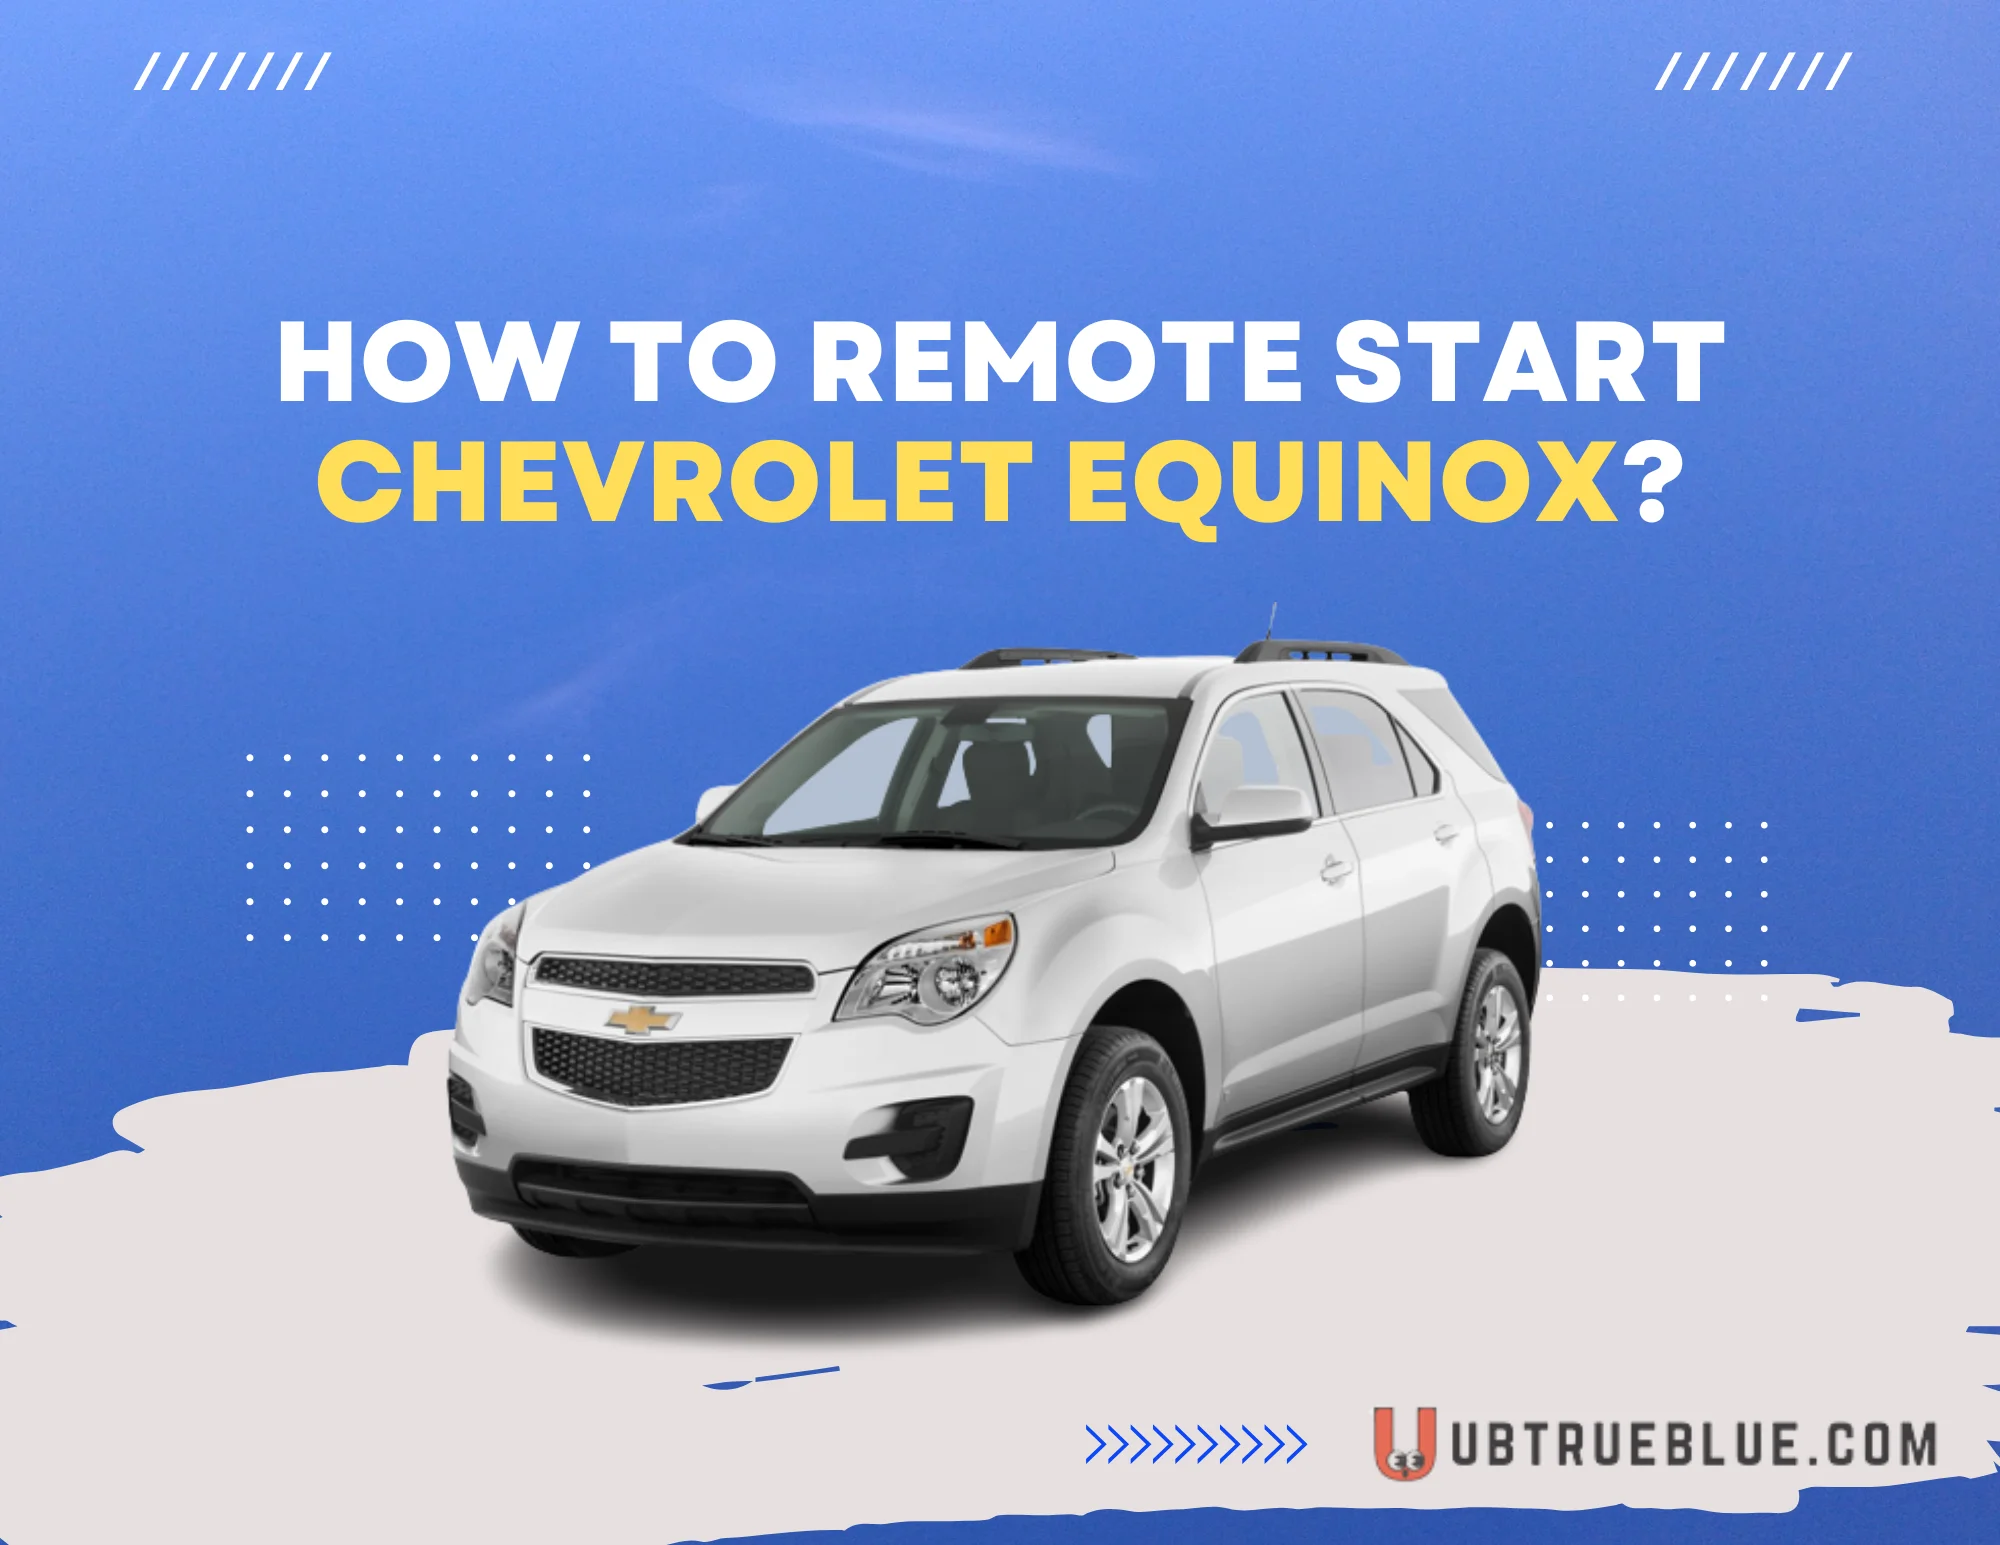 How To Remote Start Chevy Equinox On Ubtrueblue Automotive Keyless Bliss: Do I My Like A Pro Not Working 2023 Key App Fob  Full